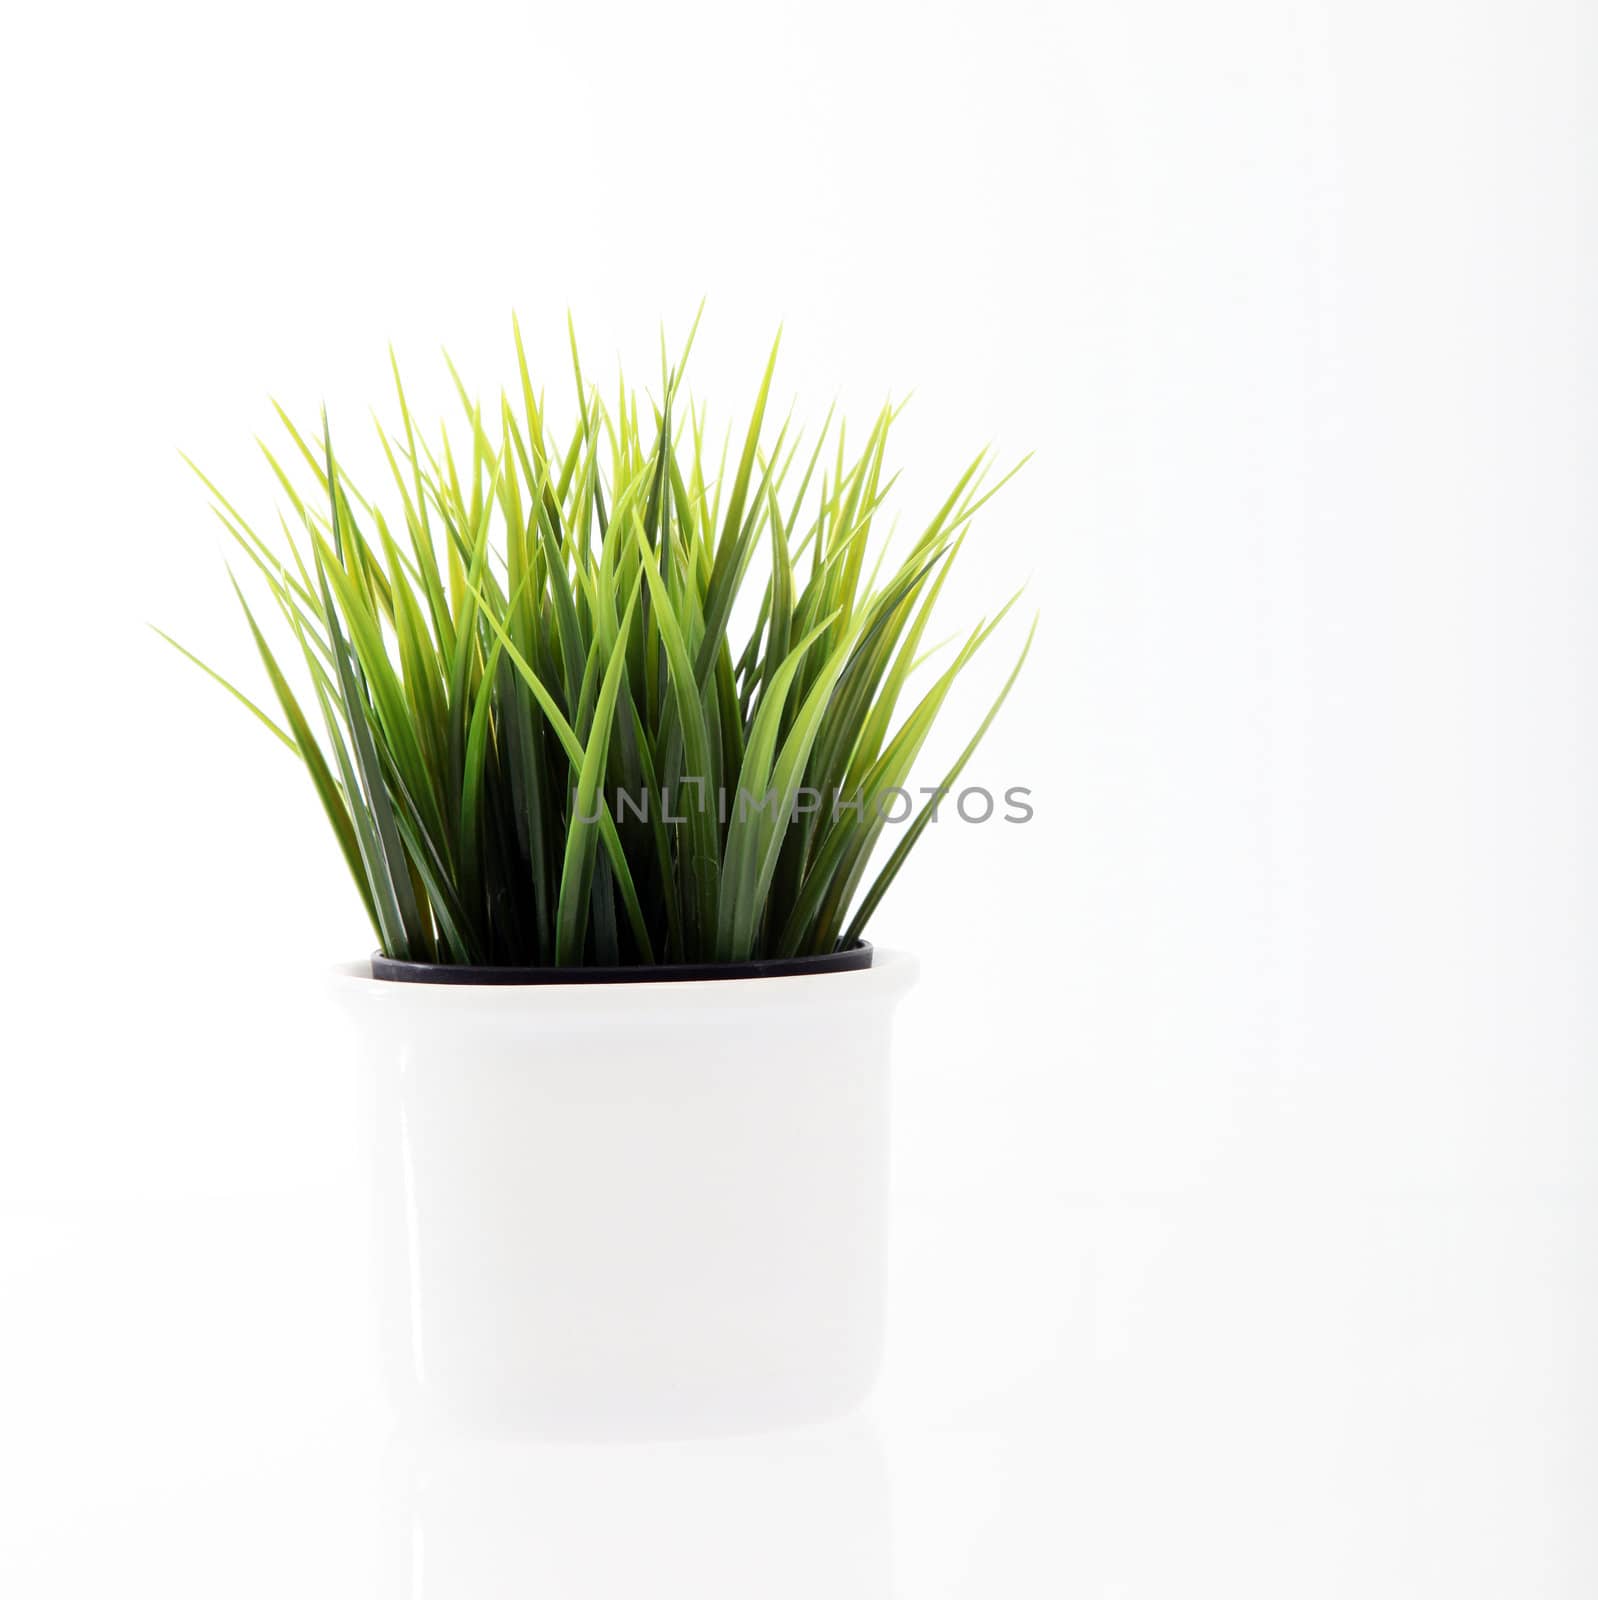 Potted Fresh Young Green Grass by Farina6000